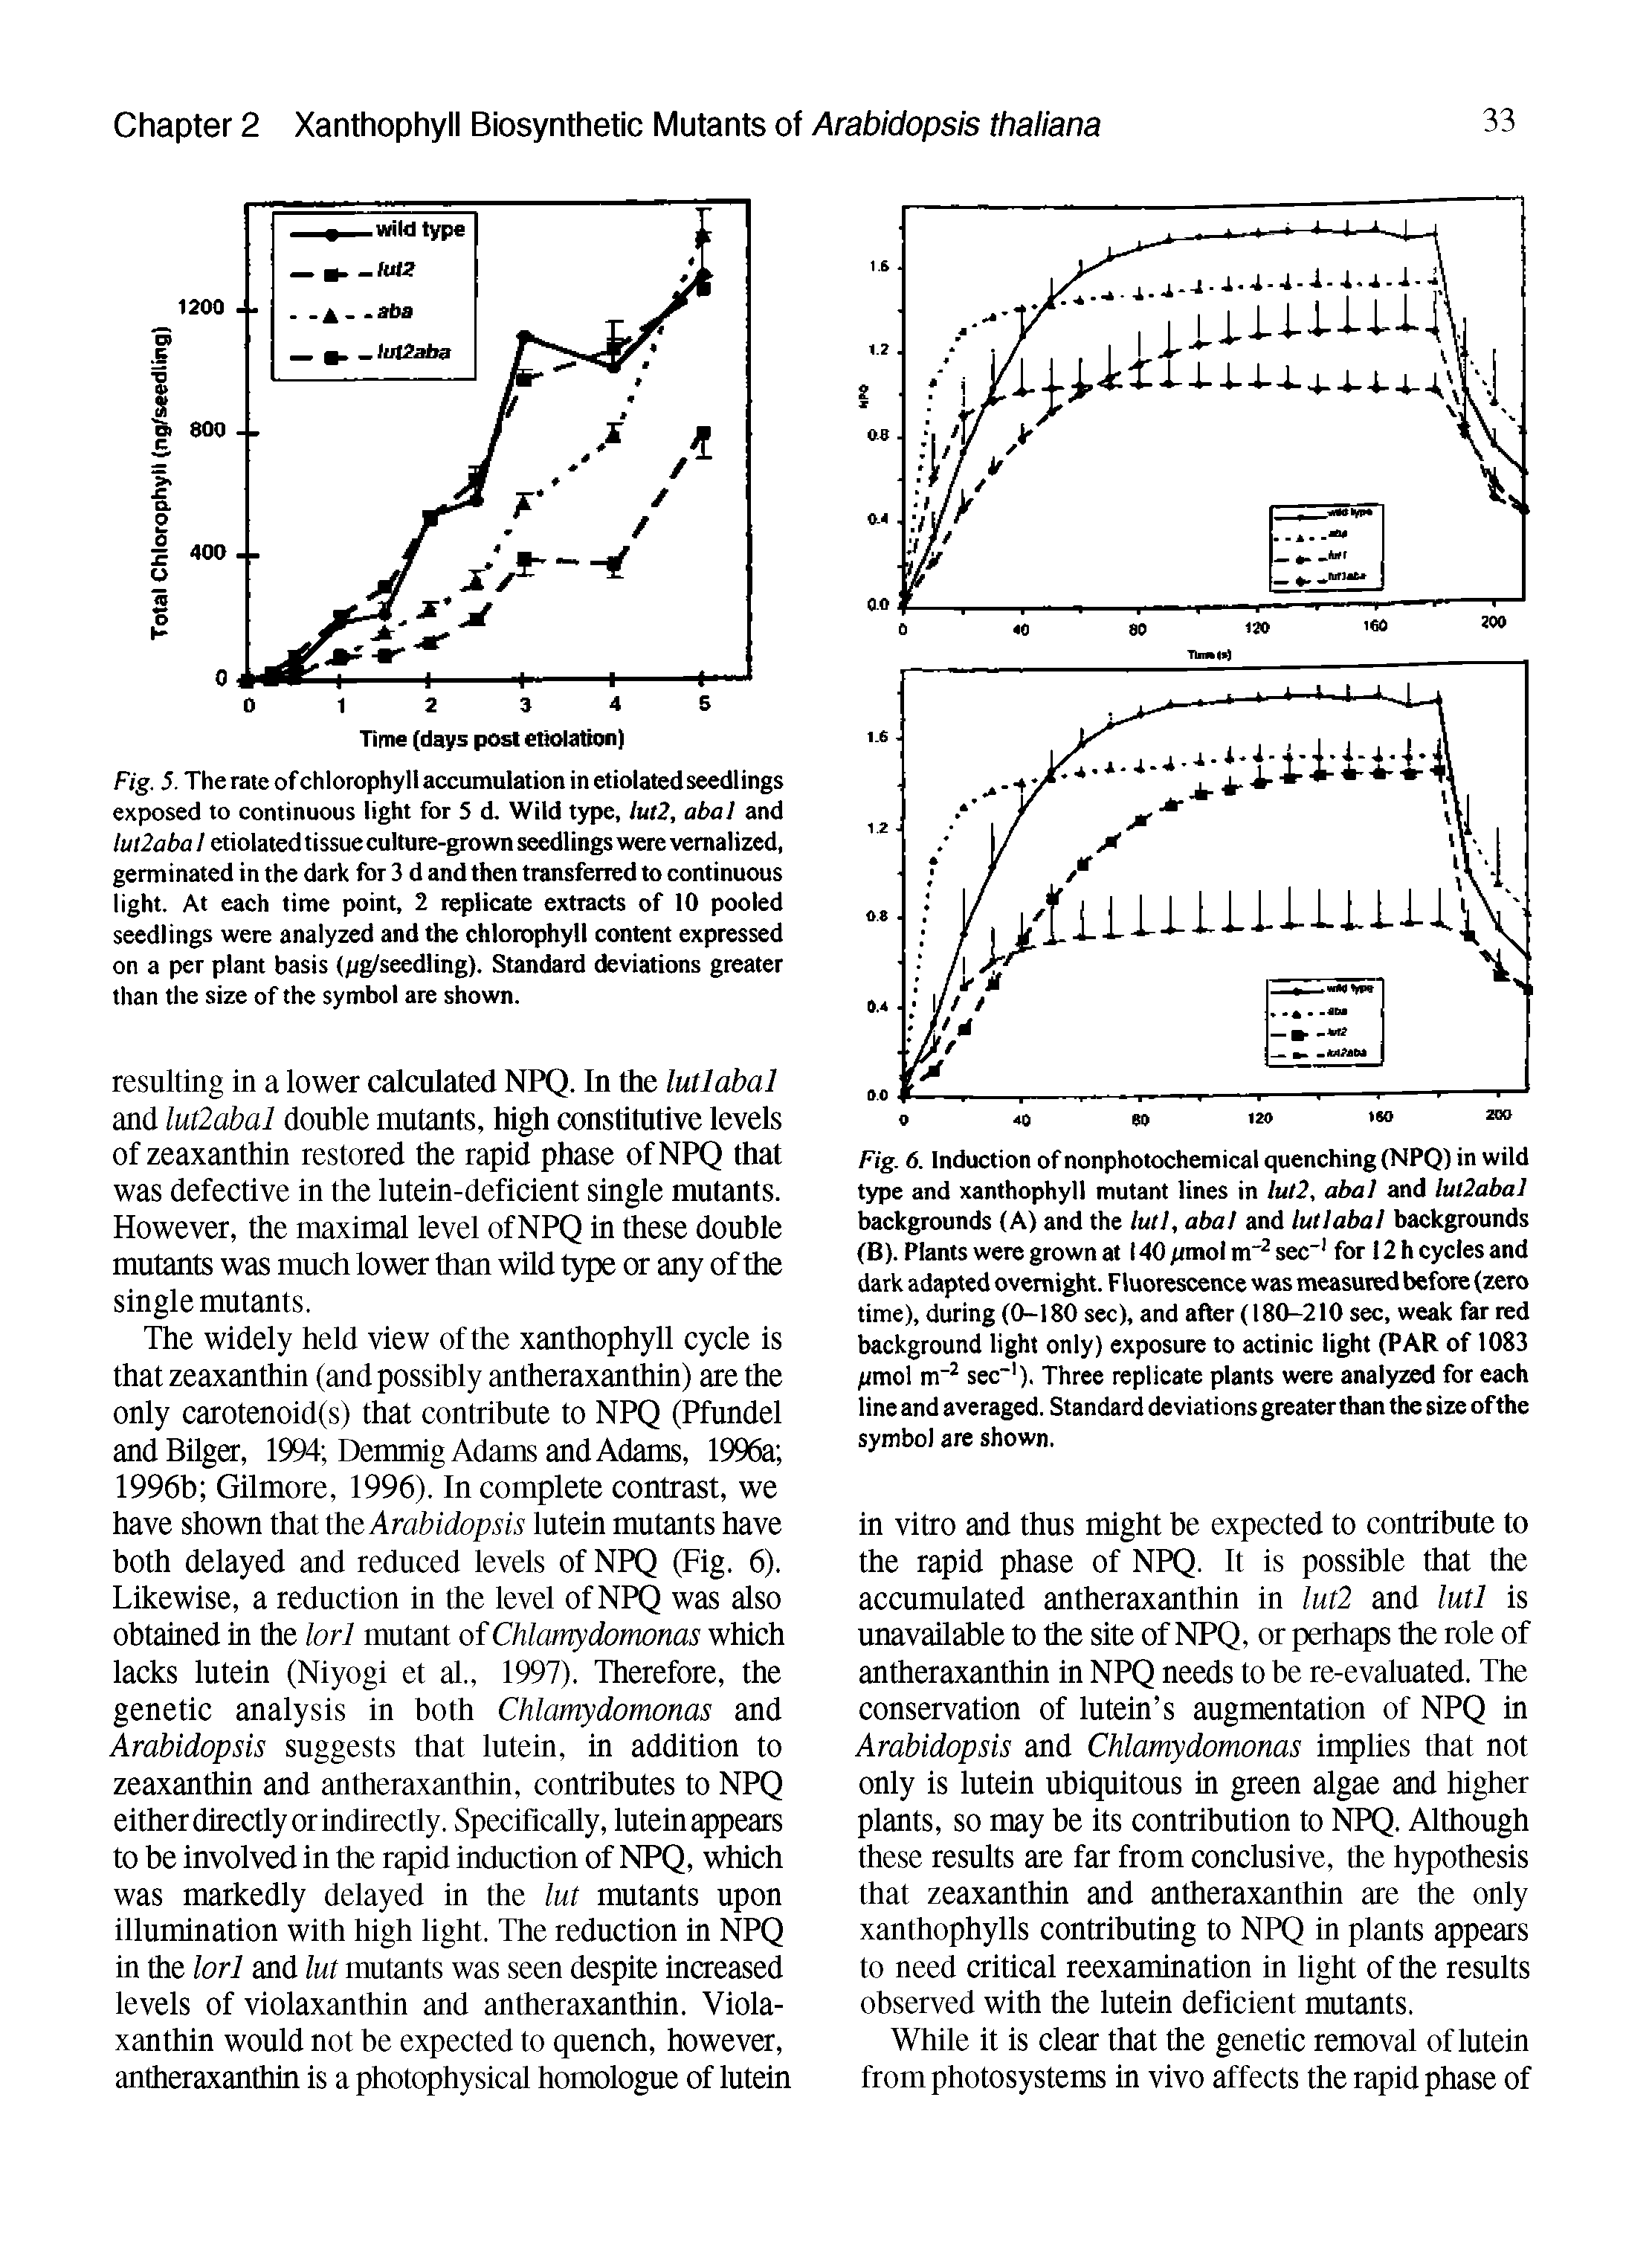 Fig. 5. The rate of chlorophyll accumulation in etiolated seedlings exposed to continuous light for 5 d. Wild type, lut2, abal and Iul2aba I etiolated tissue culture-grown seedlings were vernalized, germinated in the dark for 3 d and then transferred to continuous light. At each time point, 2 replicate extracts of 10 pooled seedlings were analyzed and the chlorophyll content expressed on a per plant basis (pg/seedling). Standard deviations greater than the size of the symbol are shown.